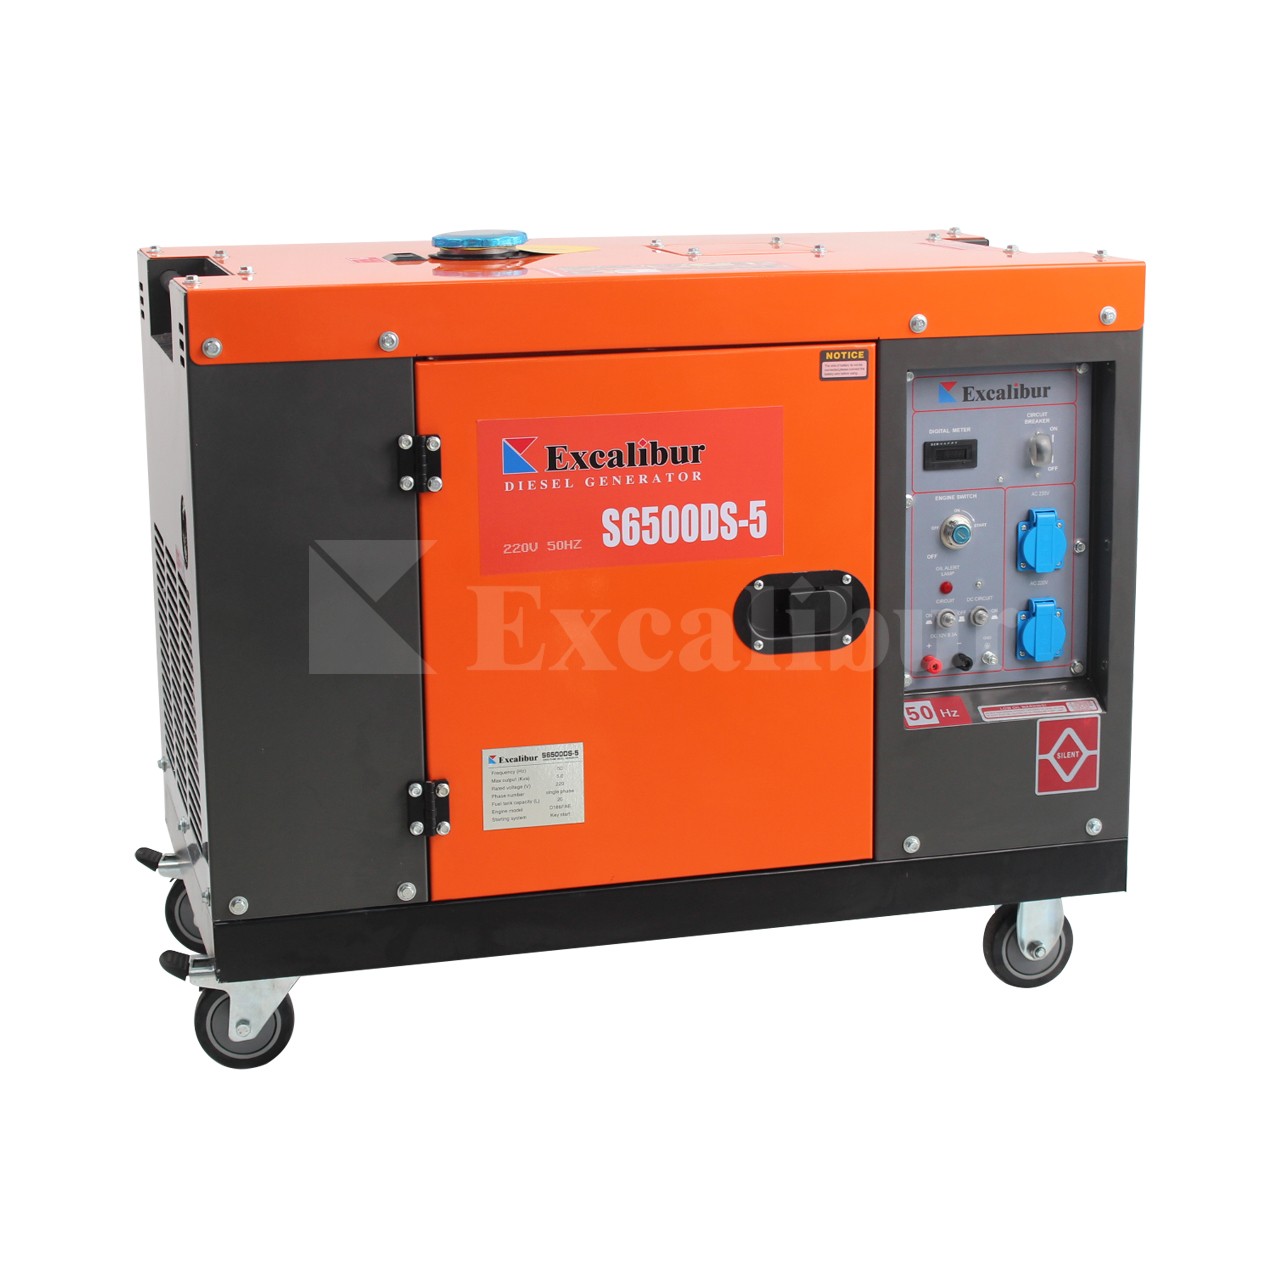 Excalibur 50Hz 220V 5 kVA Portable Silent Power Generator S6500DS-5 with 10HP Diesel Engine 186FA